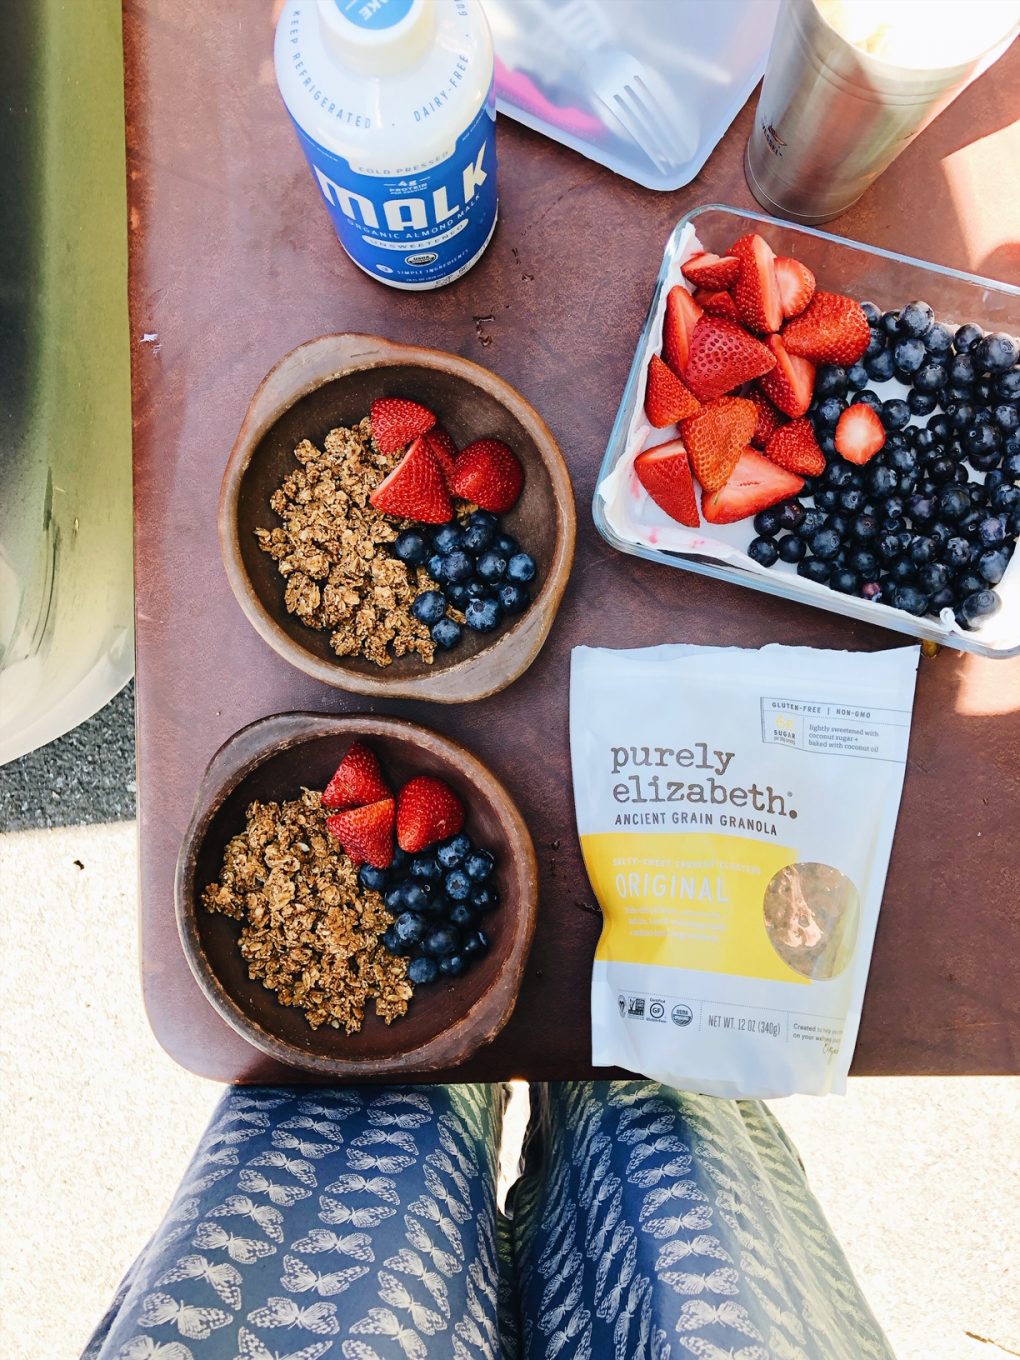 Granola and berries in two small brown bowls  on a brown folding table next to a bowl of berries and a bag of granola